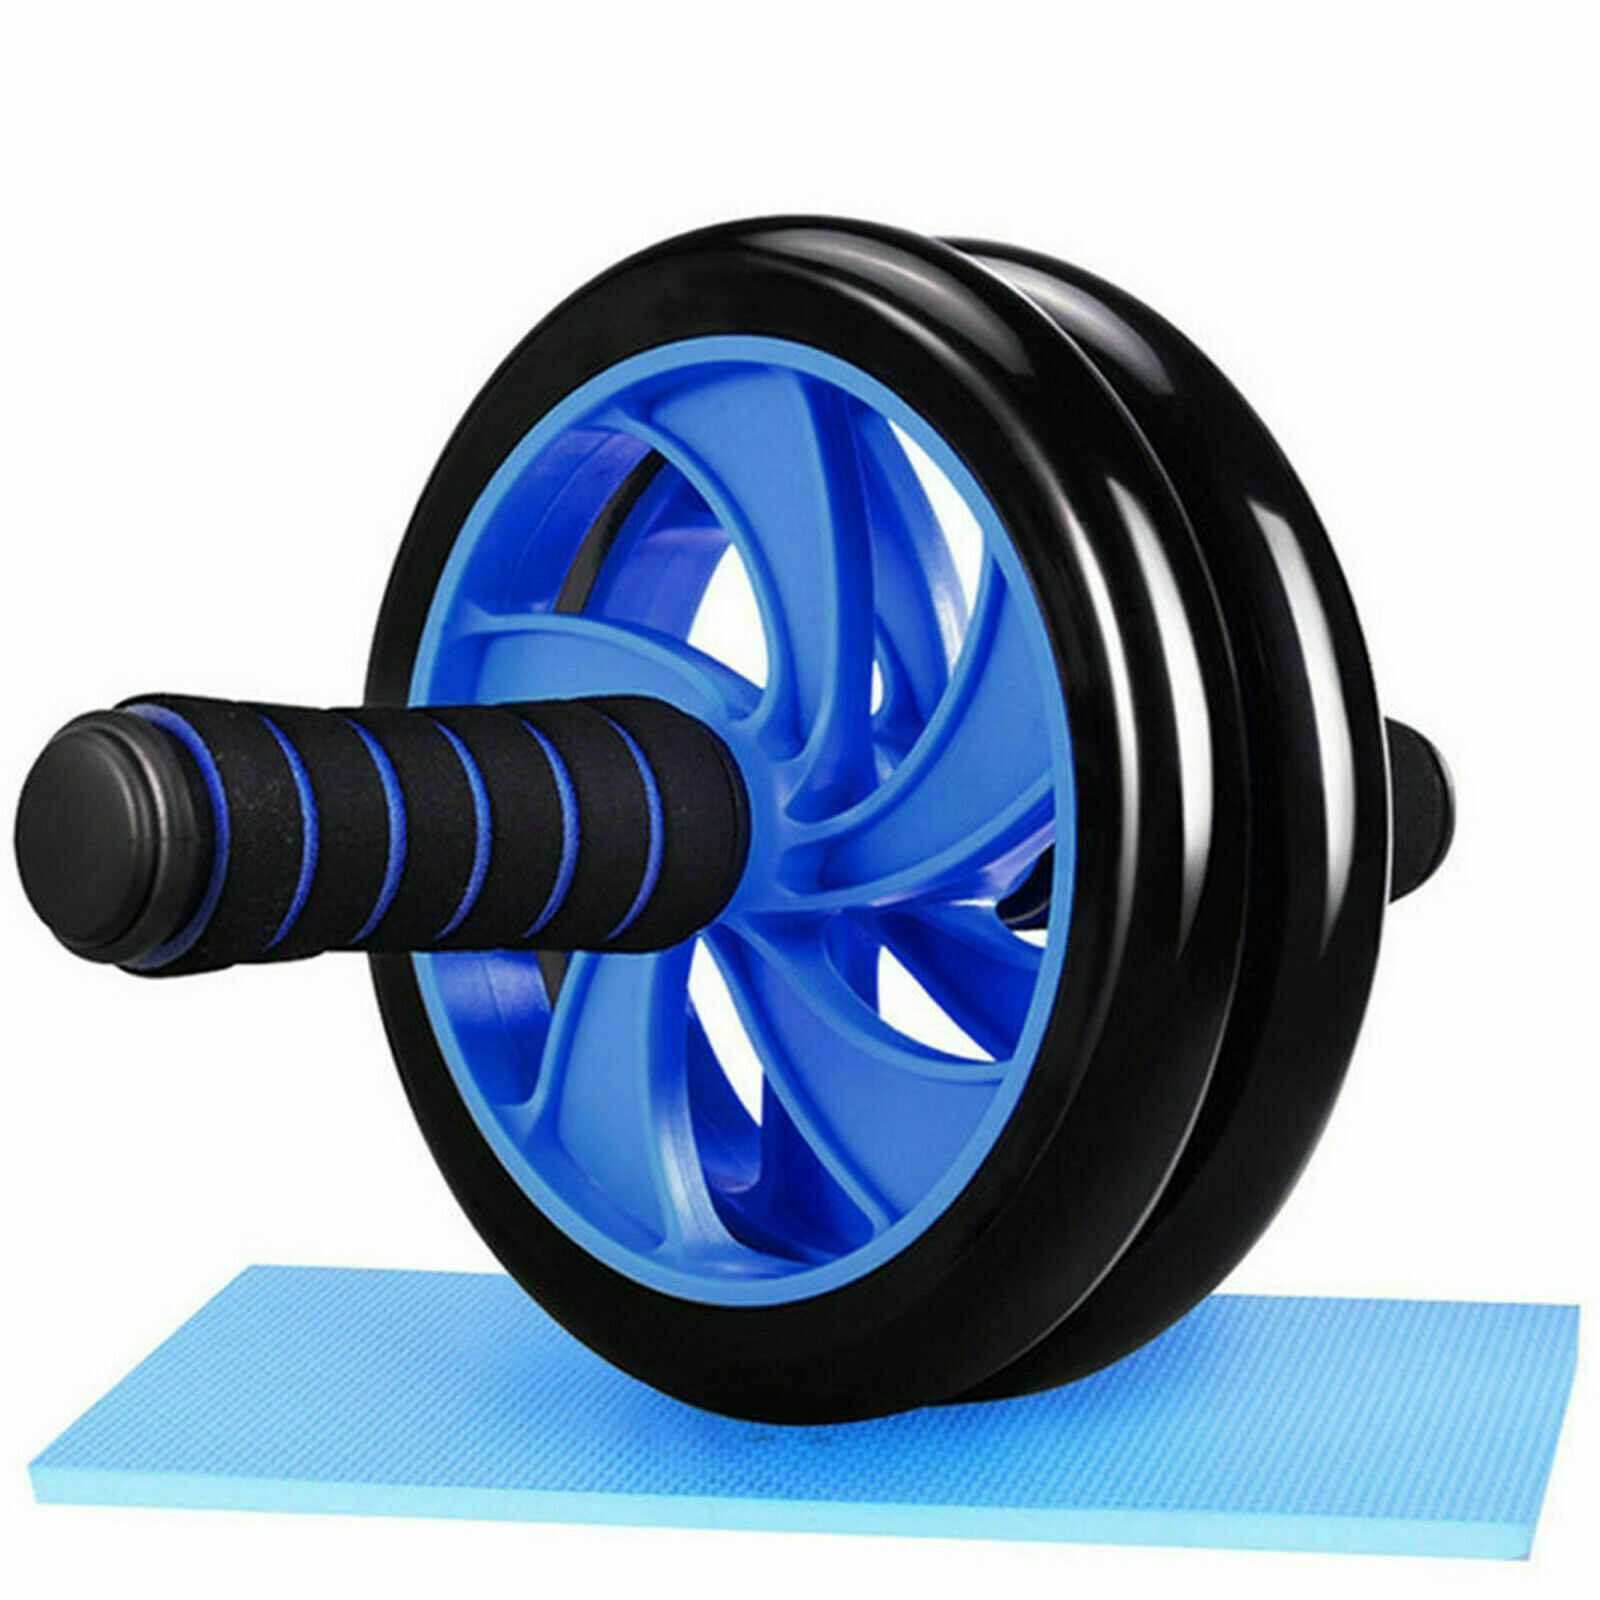 Abdonimal Muscle Wheel Fitness Home Dunlop